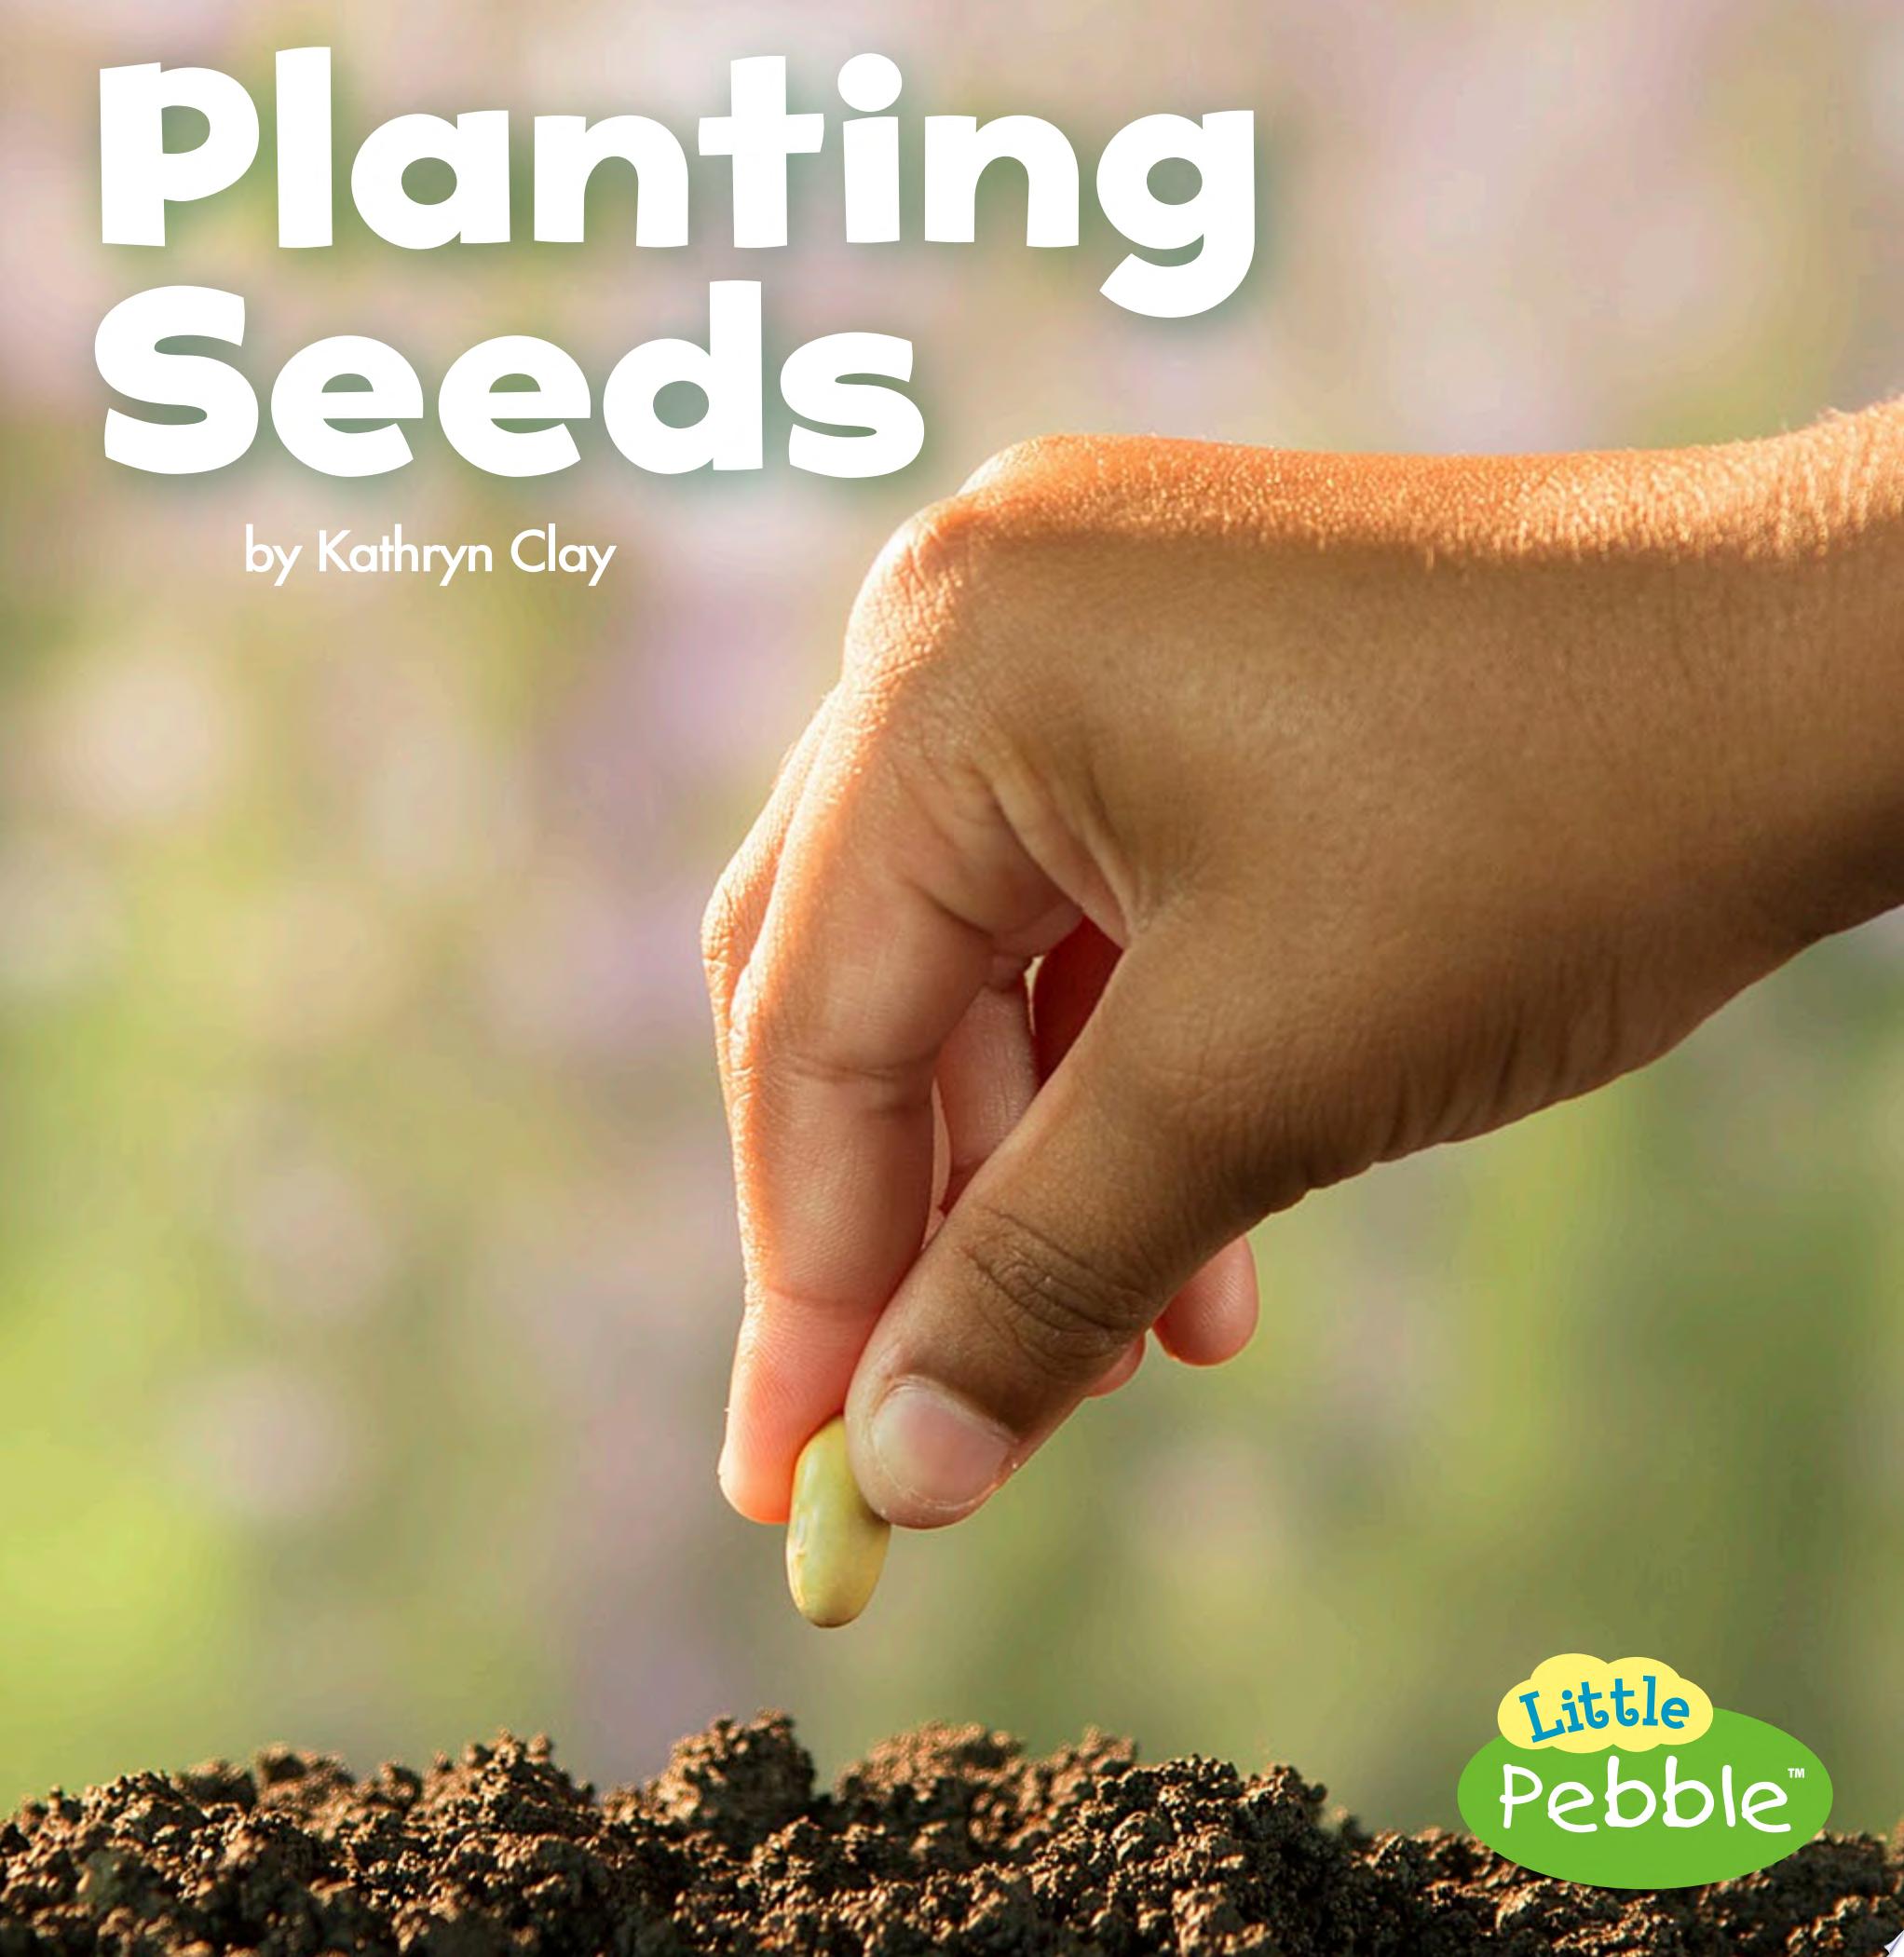 Image for "Planting Seeds"